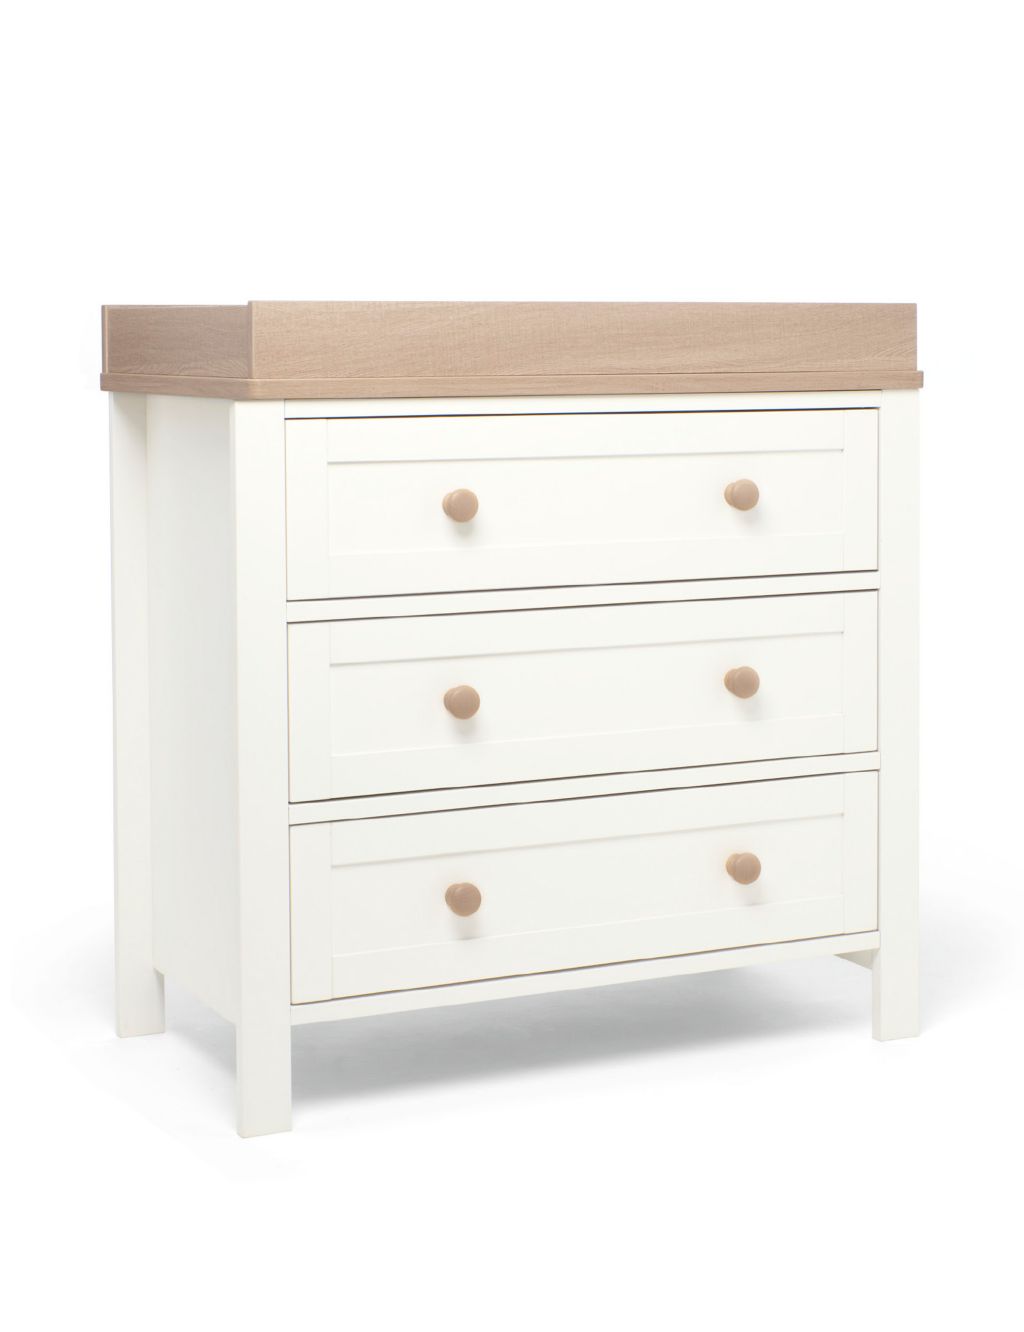 Wedmore 2 Piece Cotbed Set with Dresser image 6